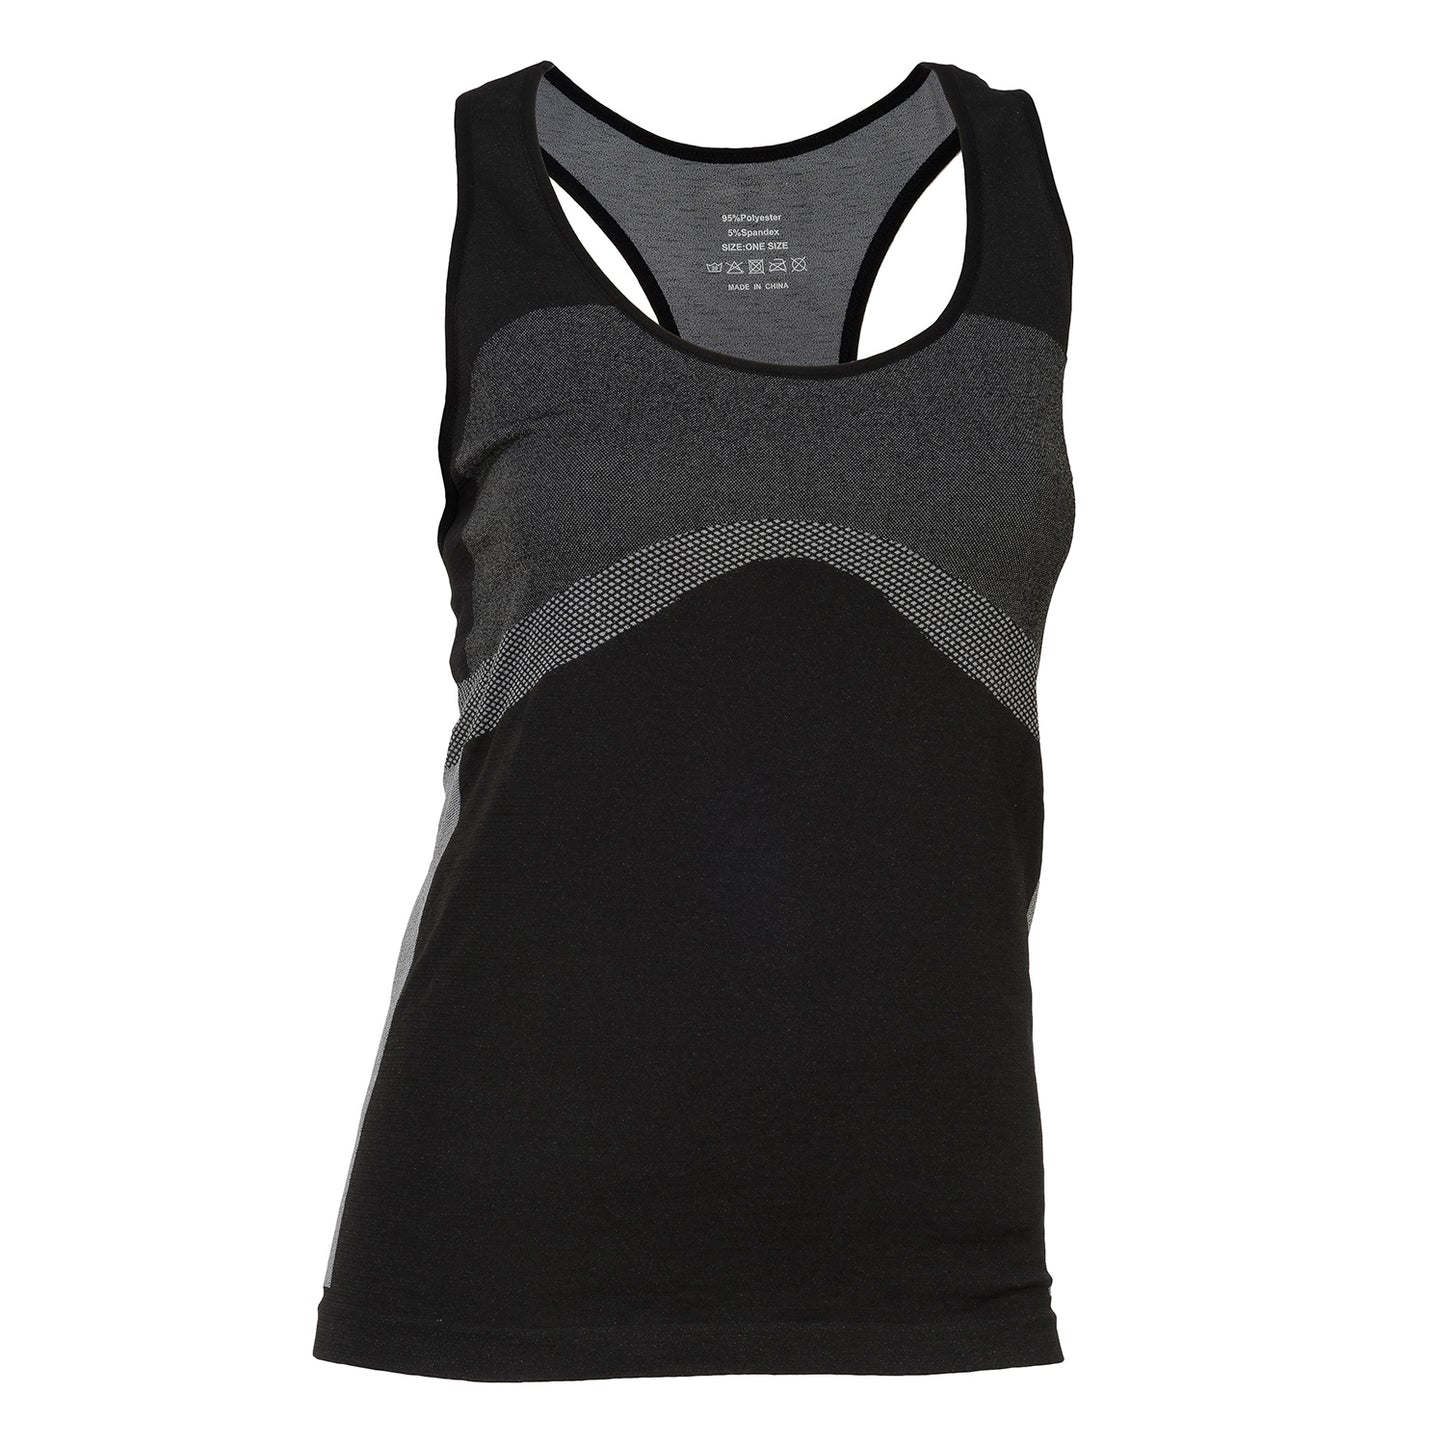 Athleisure Stretchy Sport Workout Tank Top